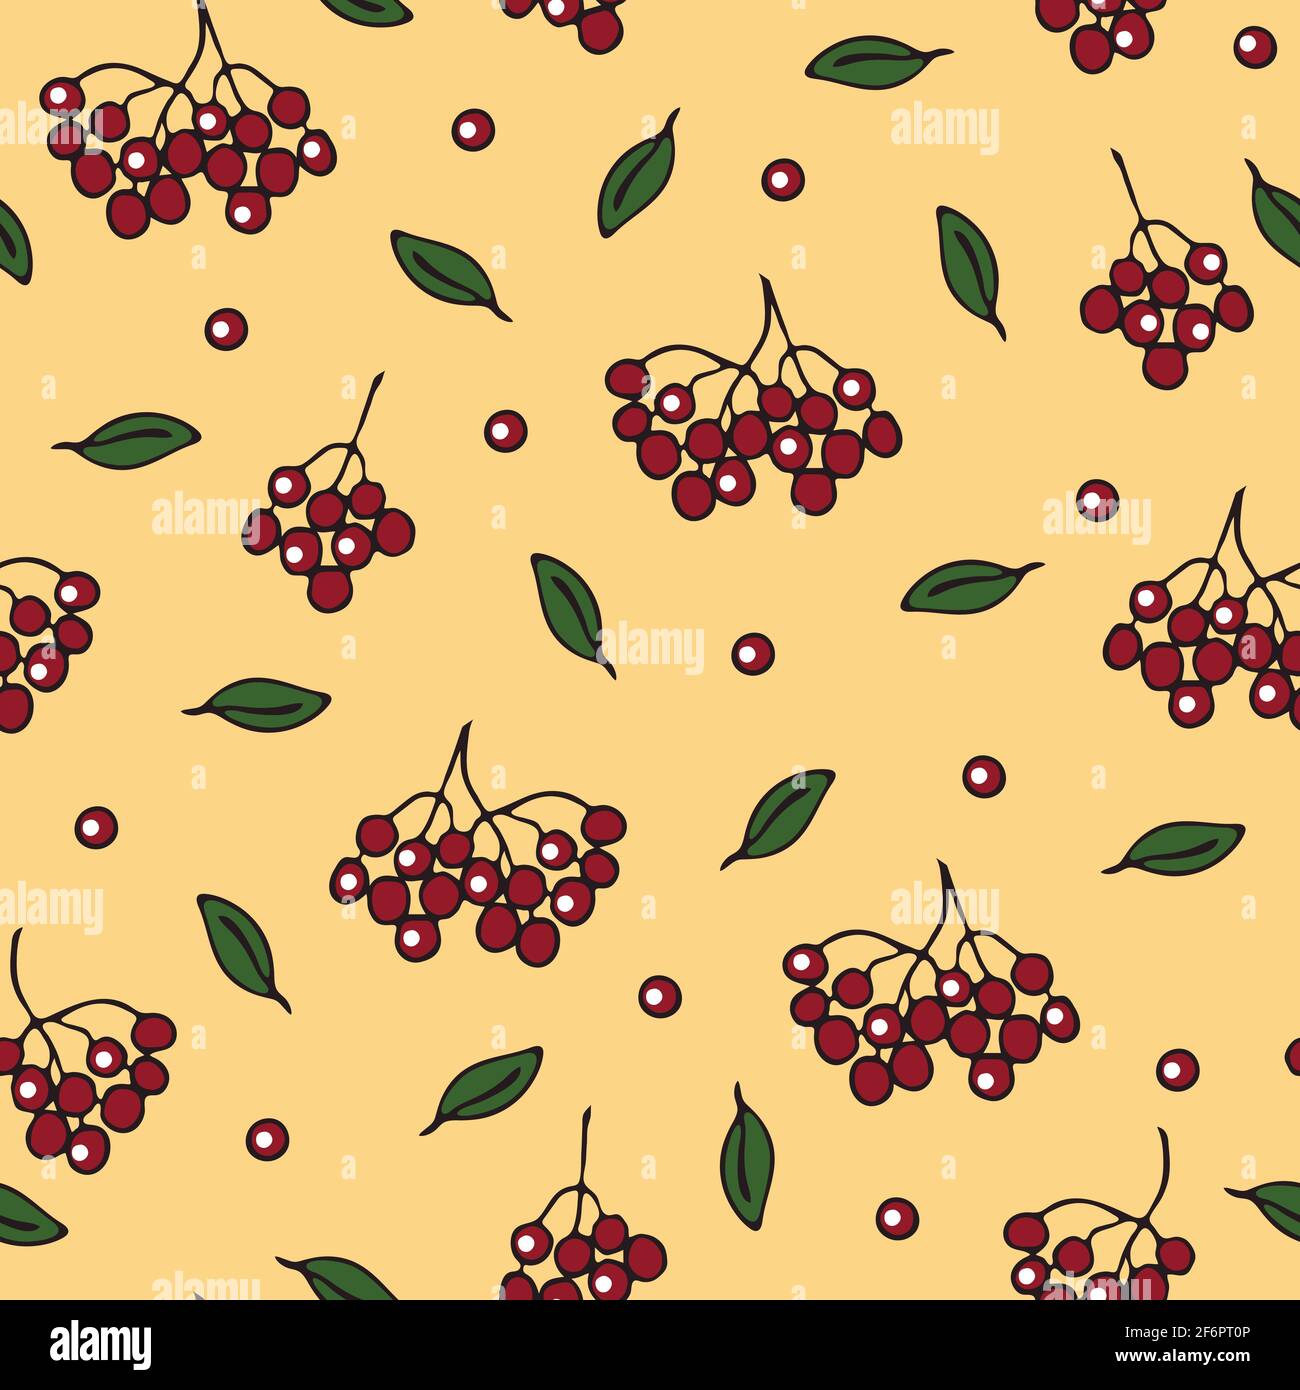 Seamless vector pattern with red berries on light pink background. Simple rowan and leaves wallpaper design. Stock Vector